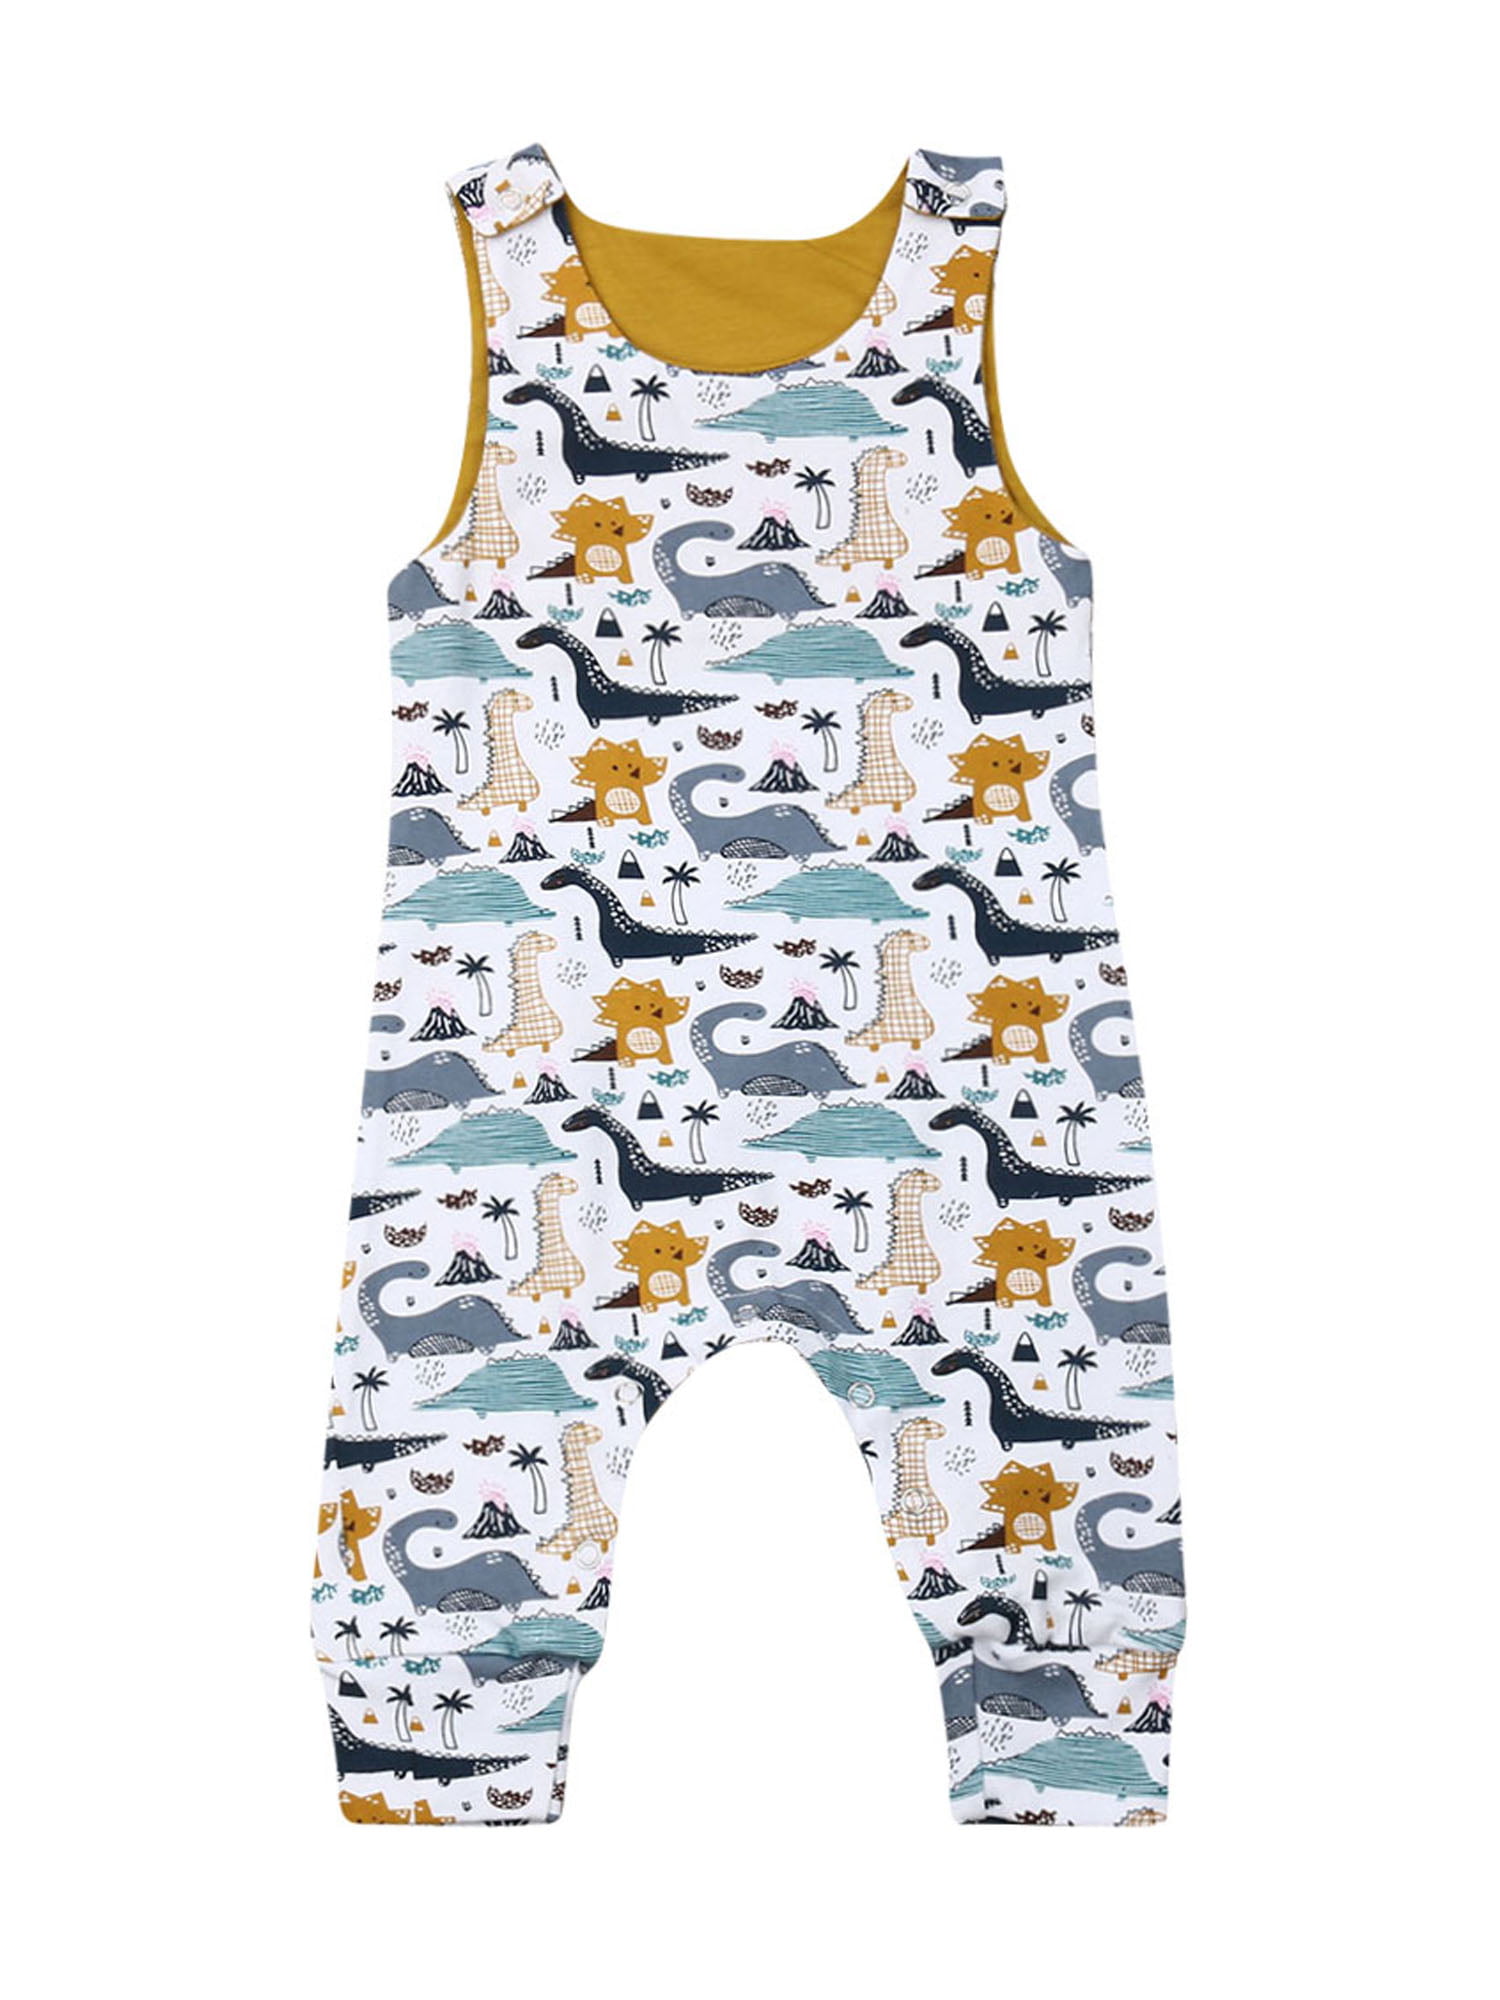 Cyond Rompers Suit for Girls Newborn Kids Baby Boys Girls Romper Bodysuit Dinosaur Printing Romper Jumpsuit+Headband Outfits Summer Sleeveless Casual Daily Mini Playsuit